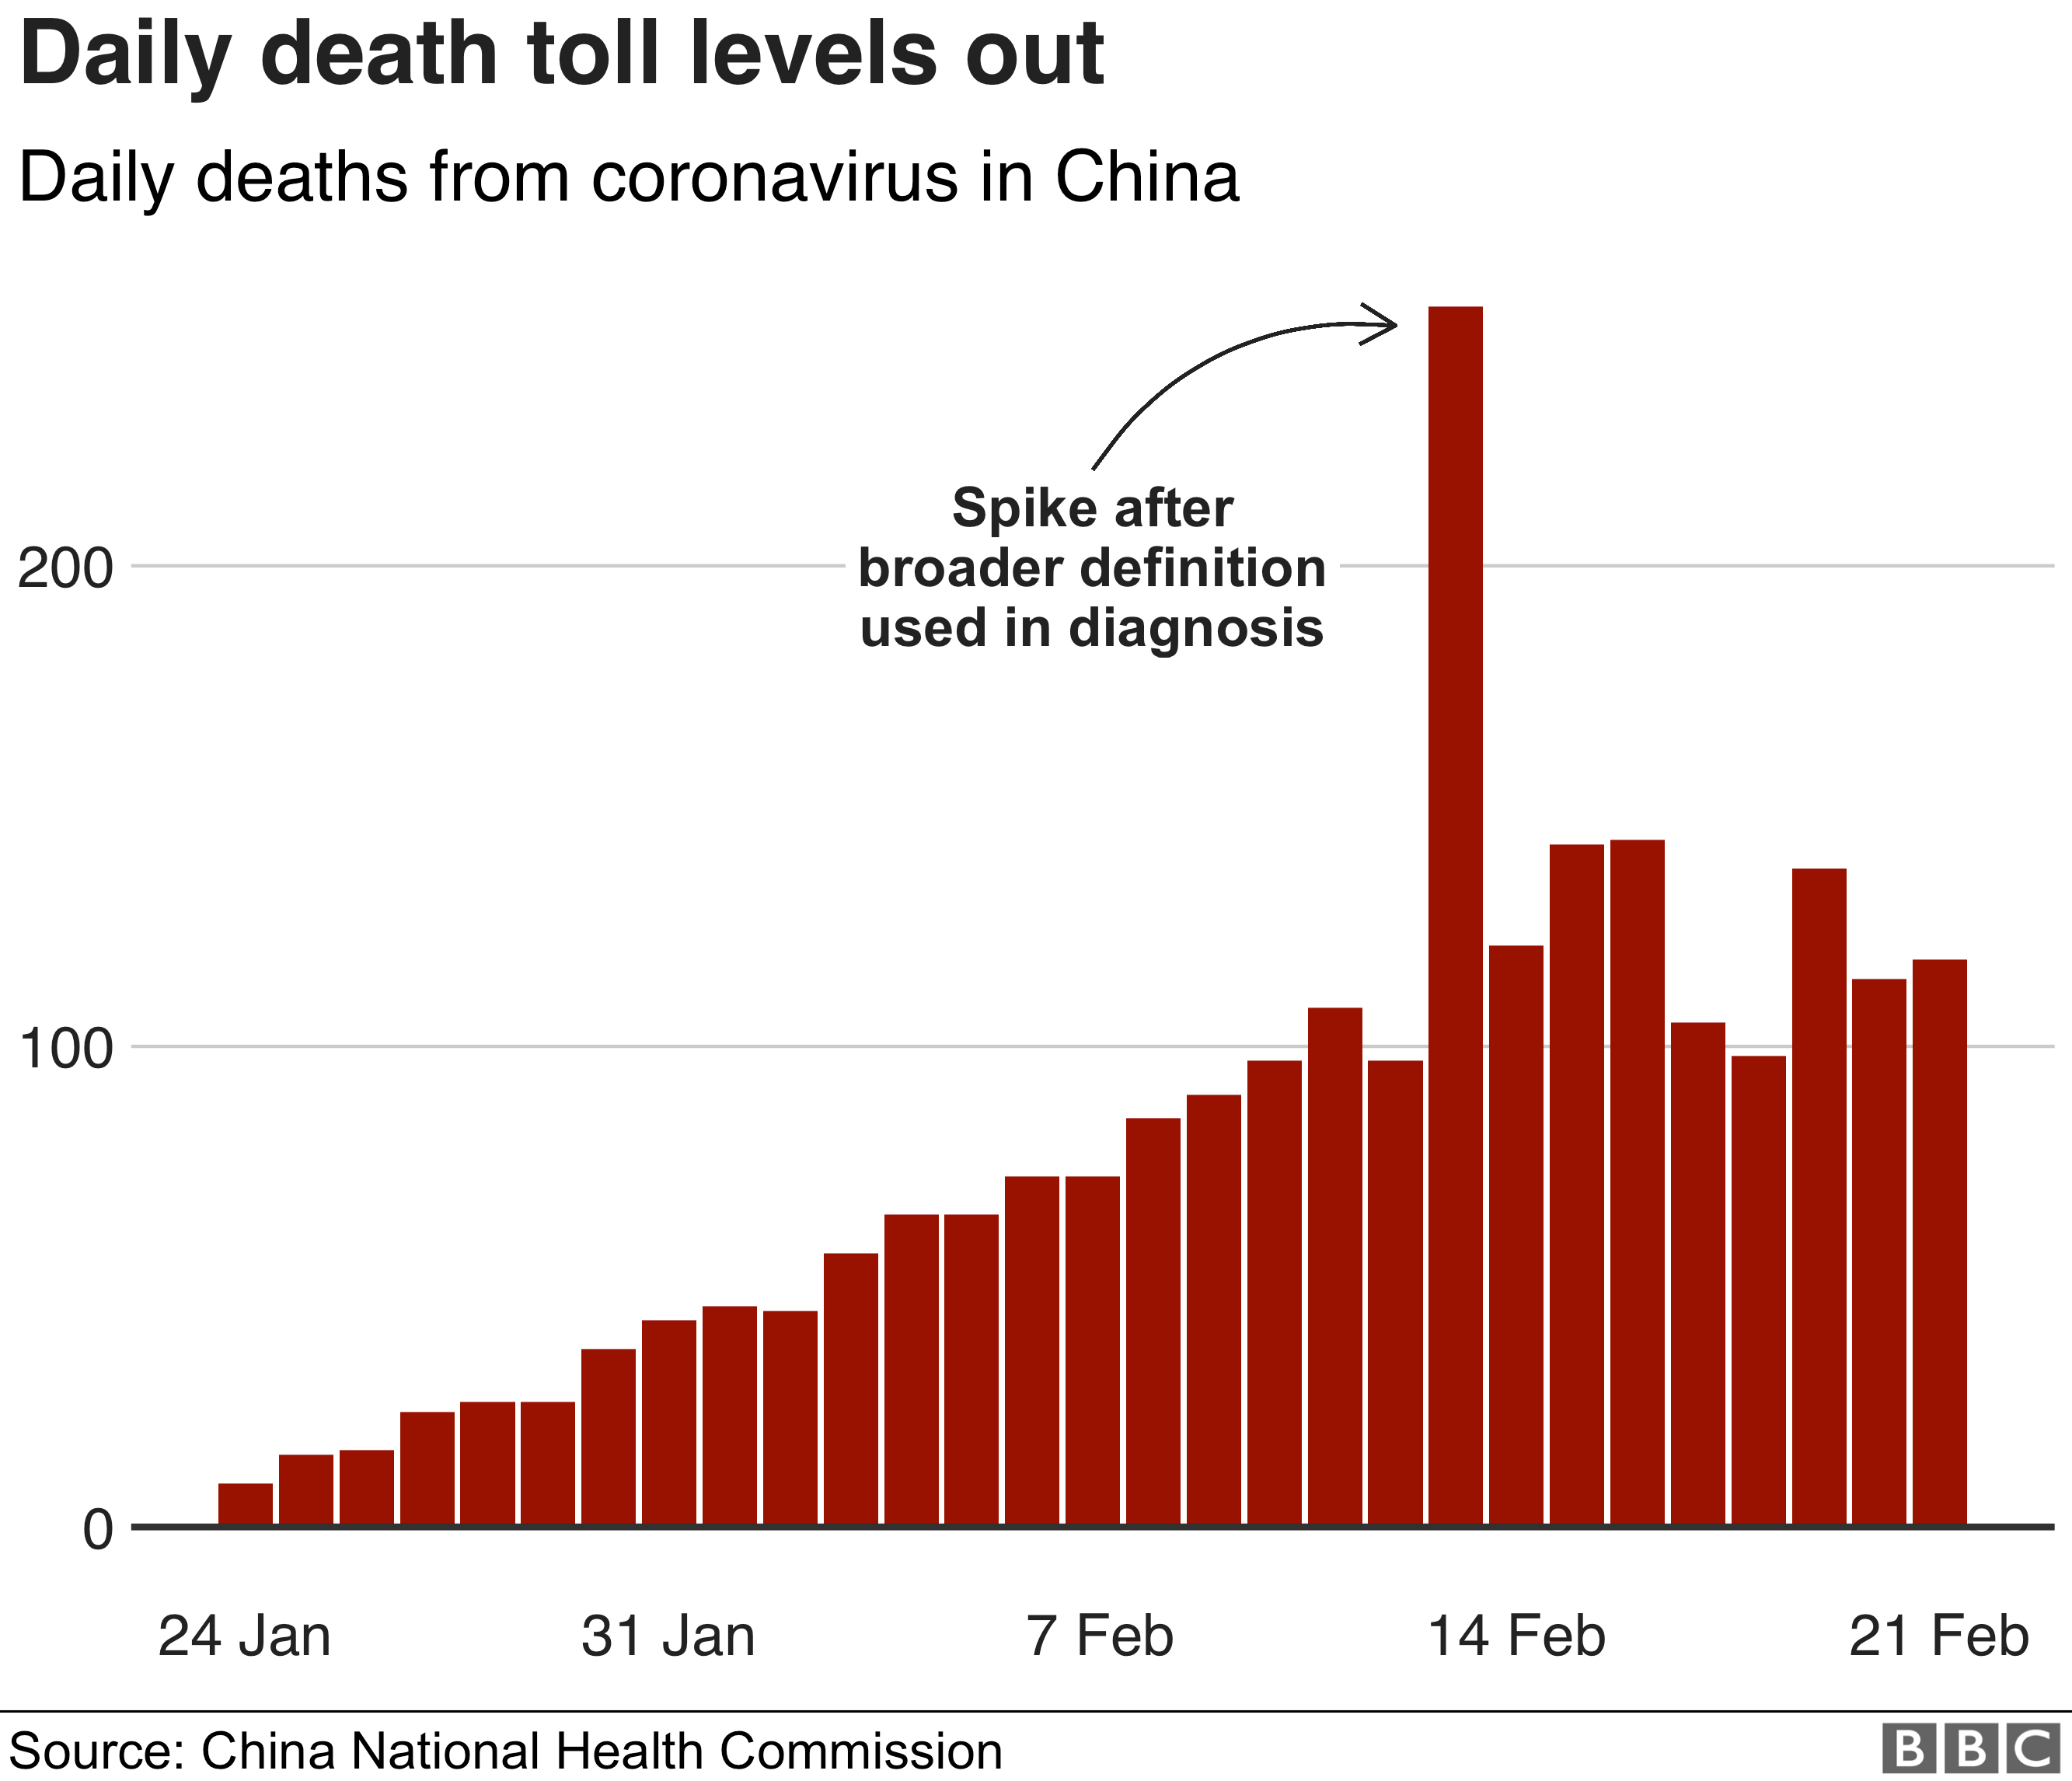 Daily recorded deaths have levelled out.